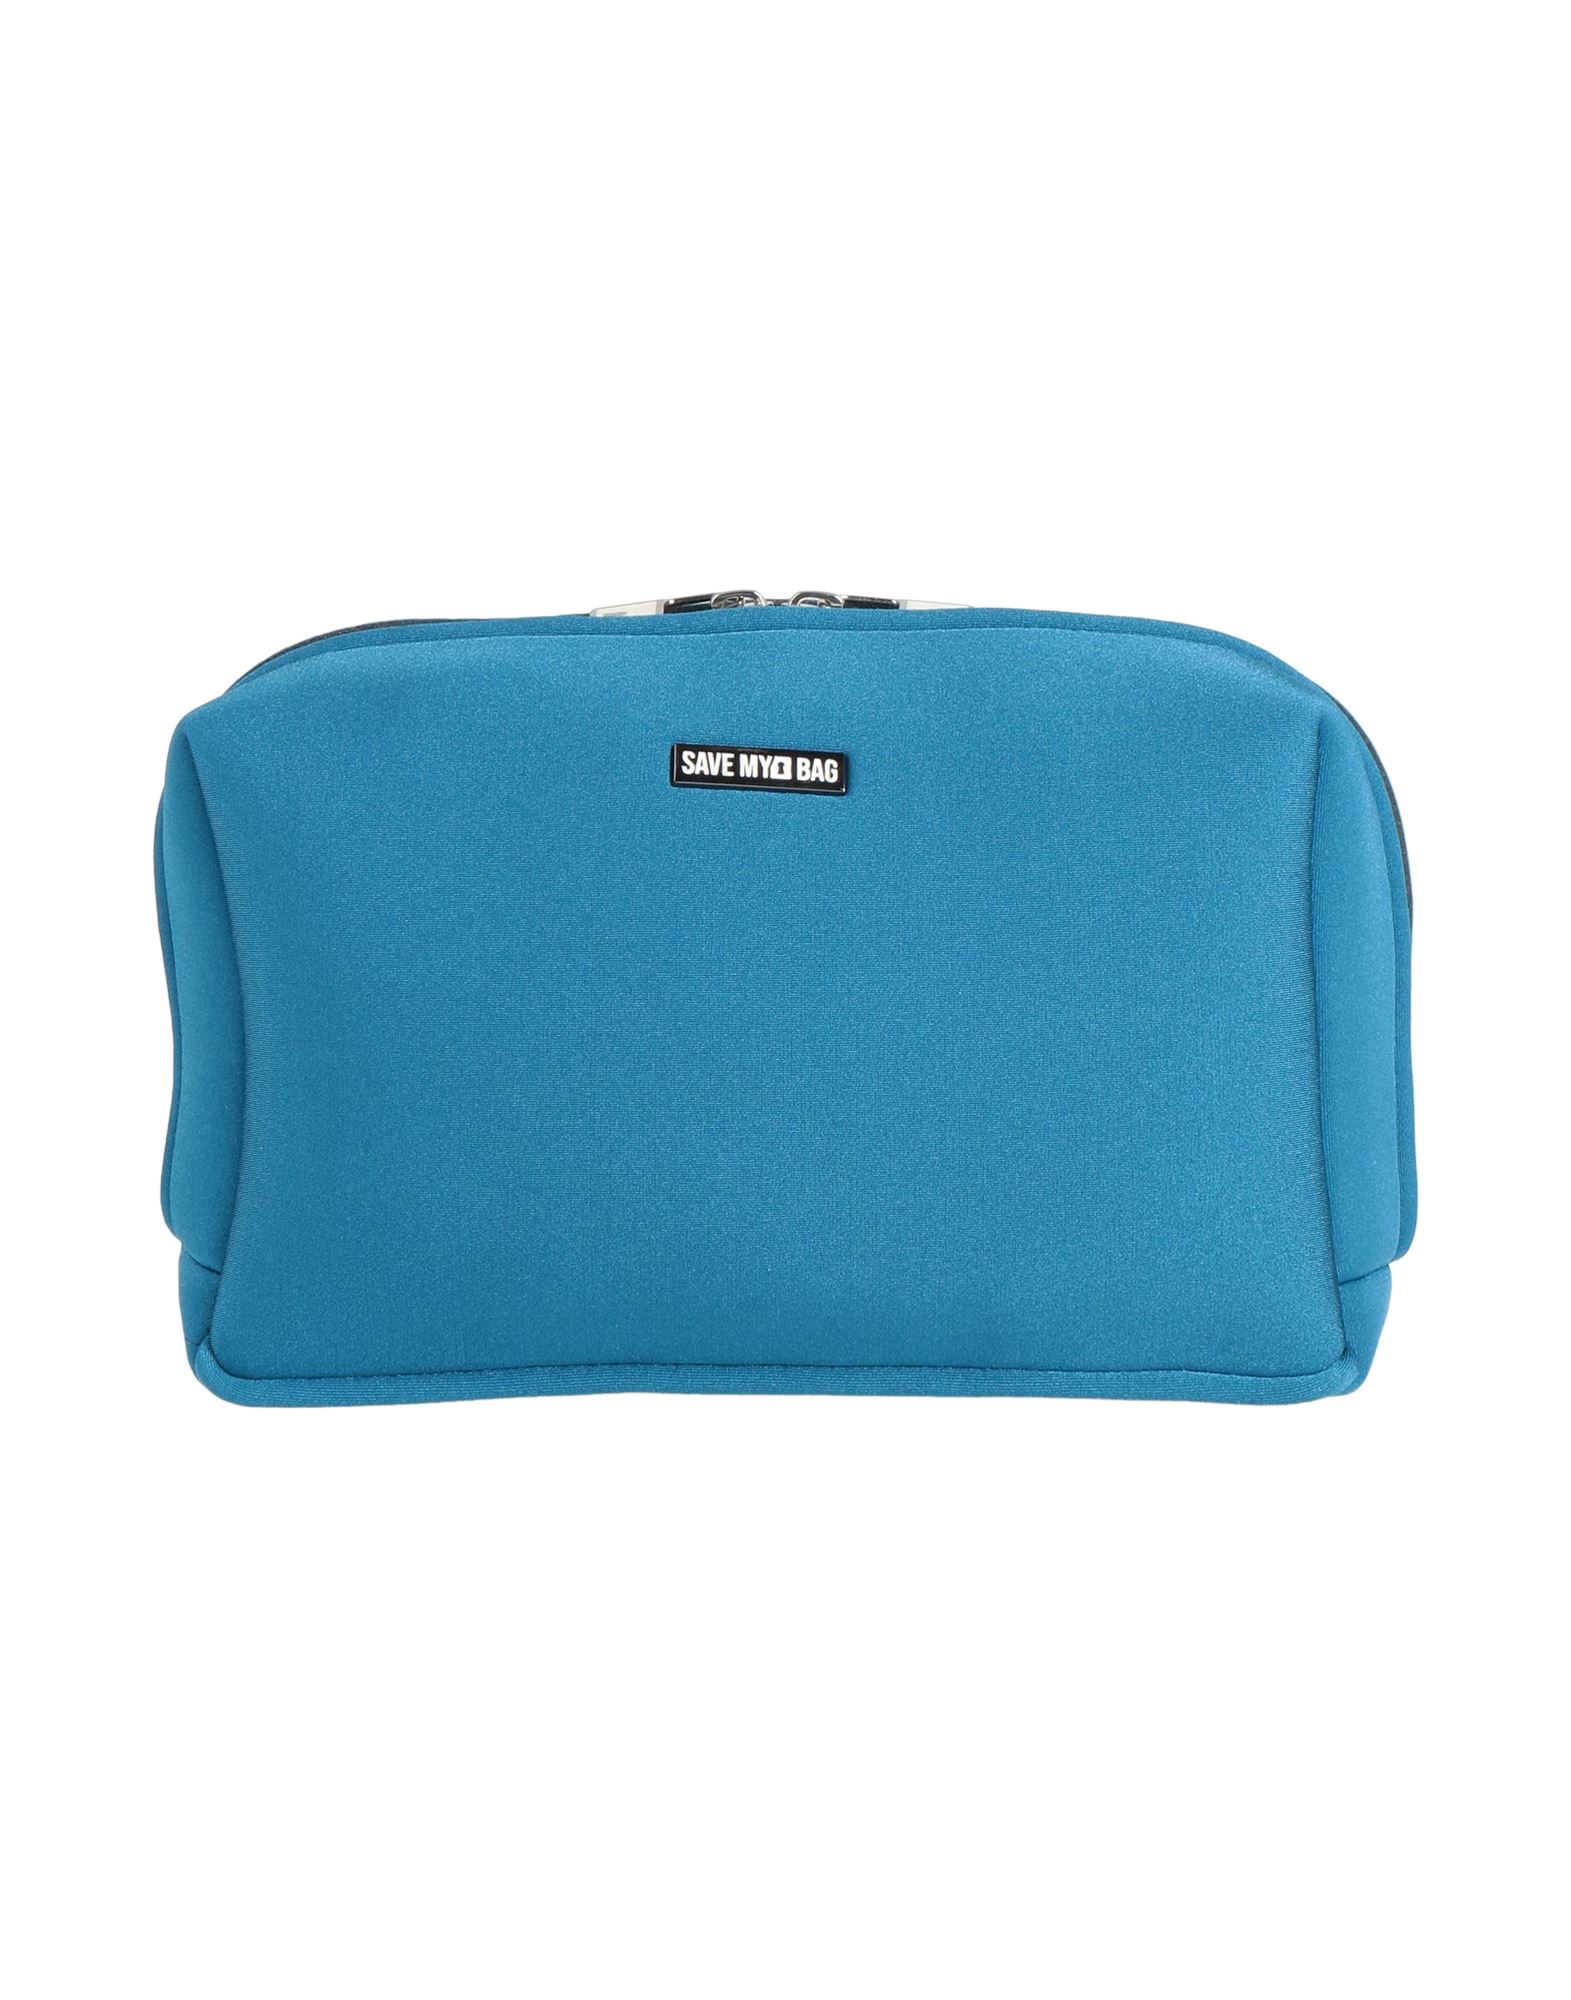 Save My Bag Beauty Cases In Pastel Blue